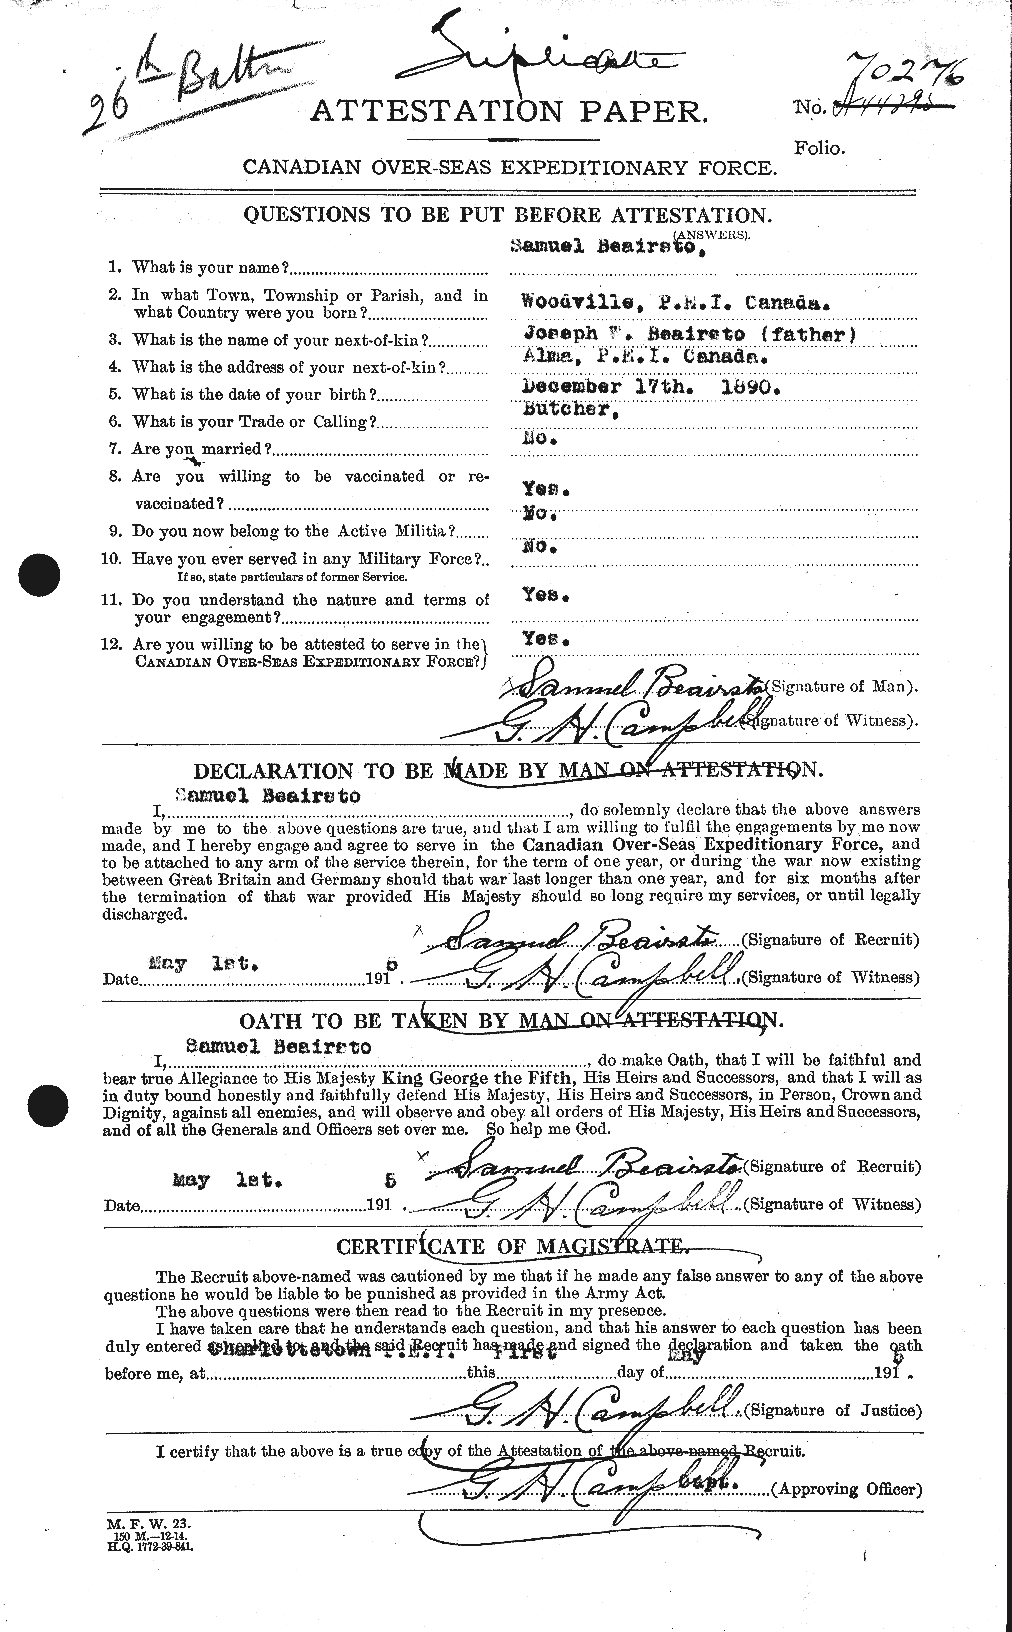 Personnel Records of the First World War - CEF 235257a